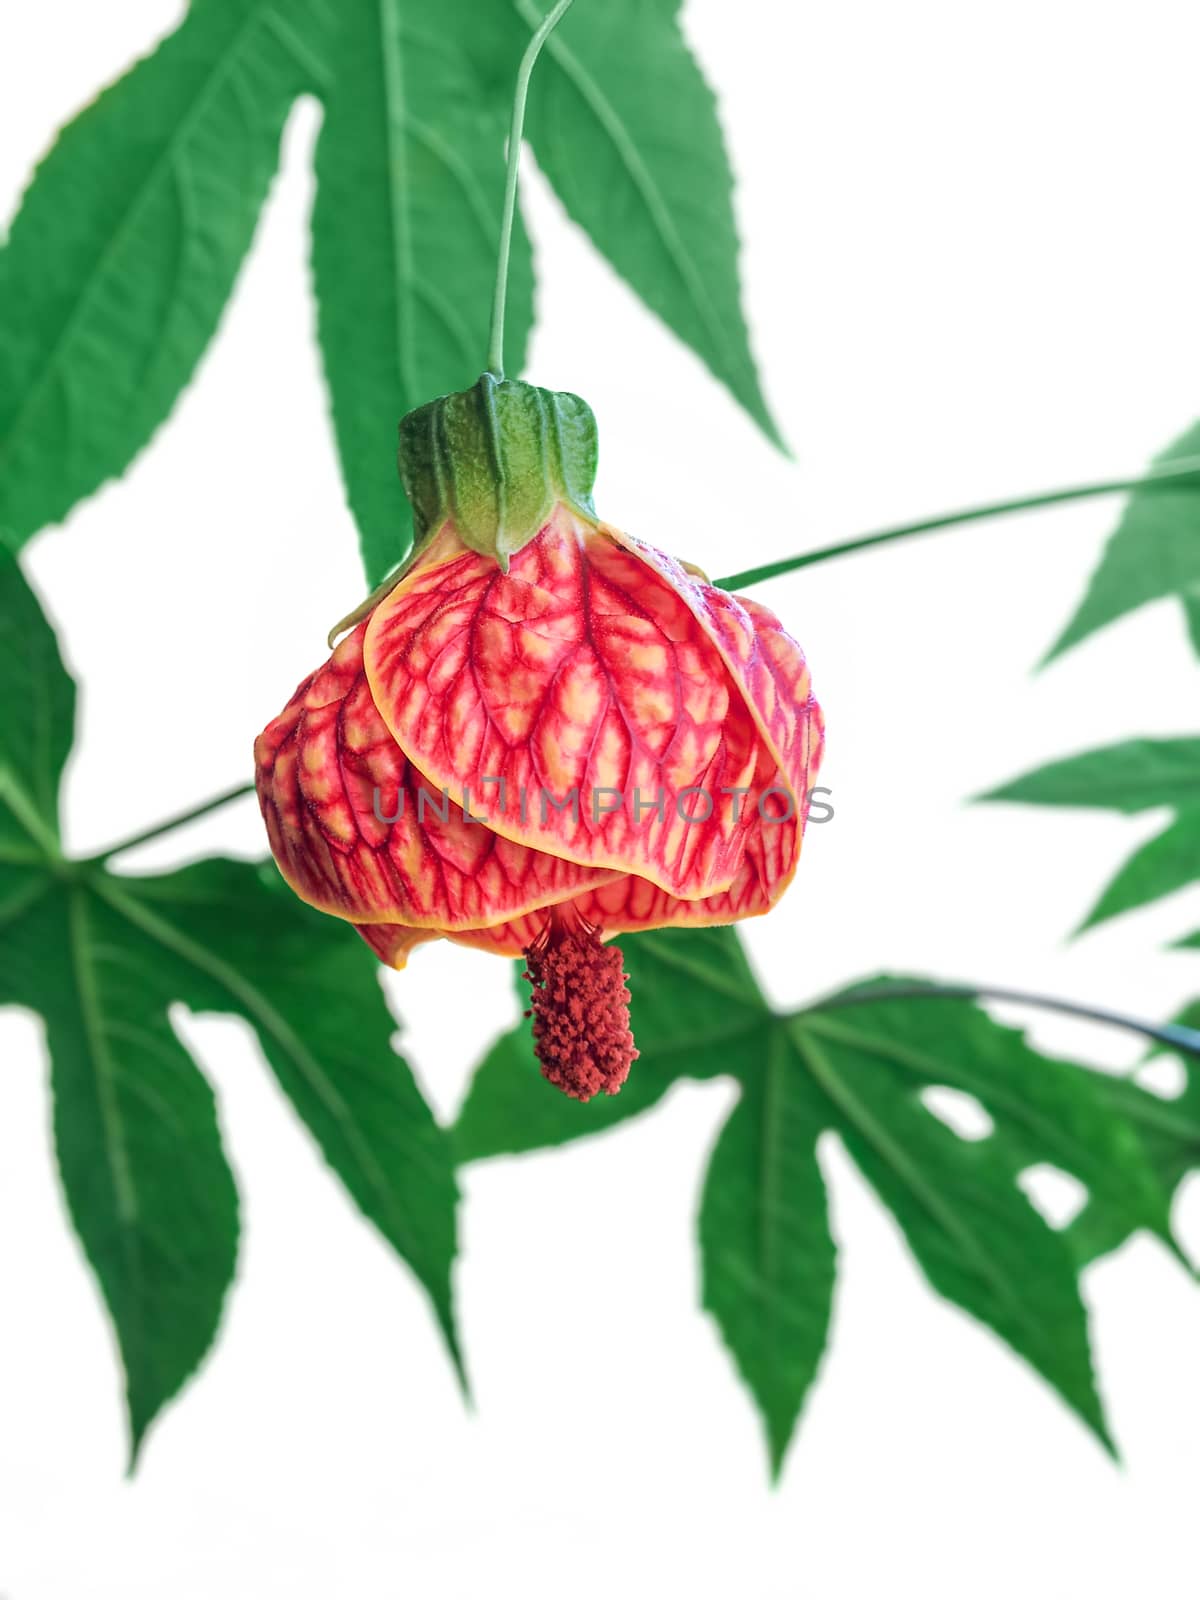 Flowering Maple plant, or Chinese Lantern, isolated over white background. This variety is called Tiger Eye.